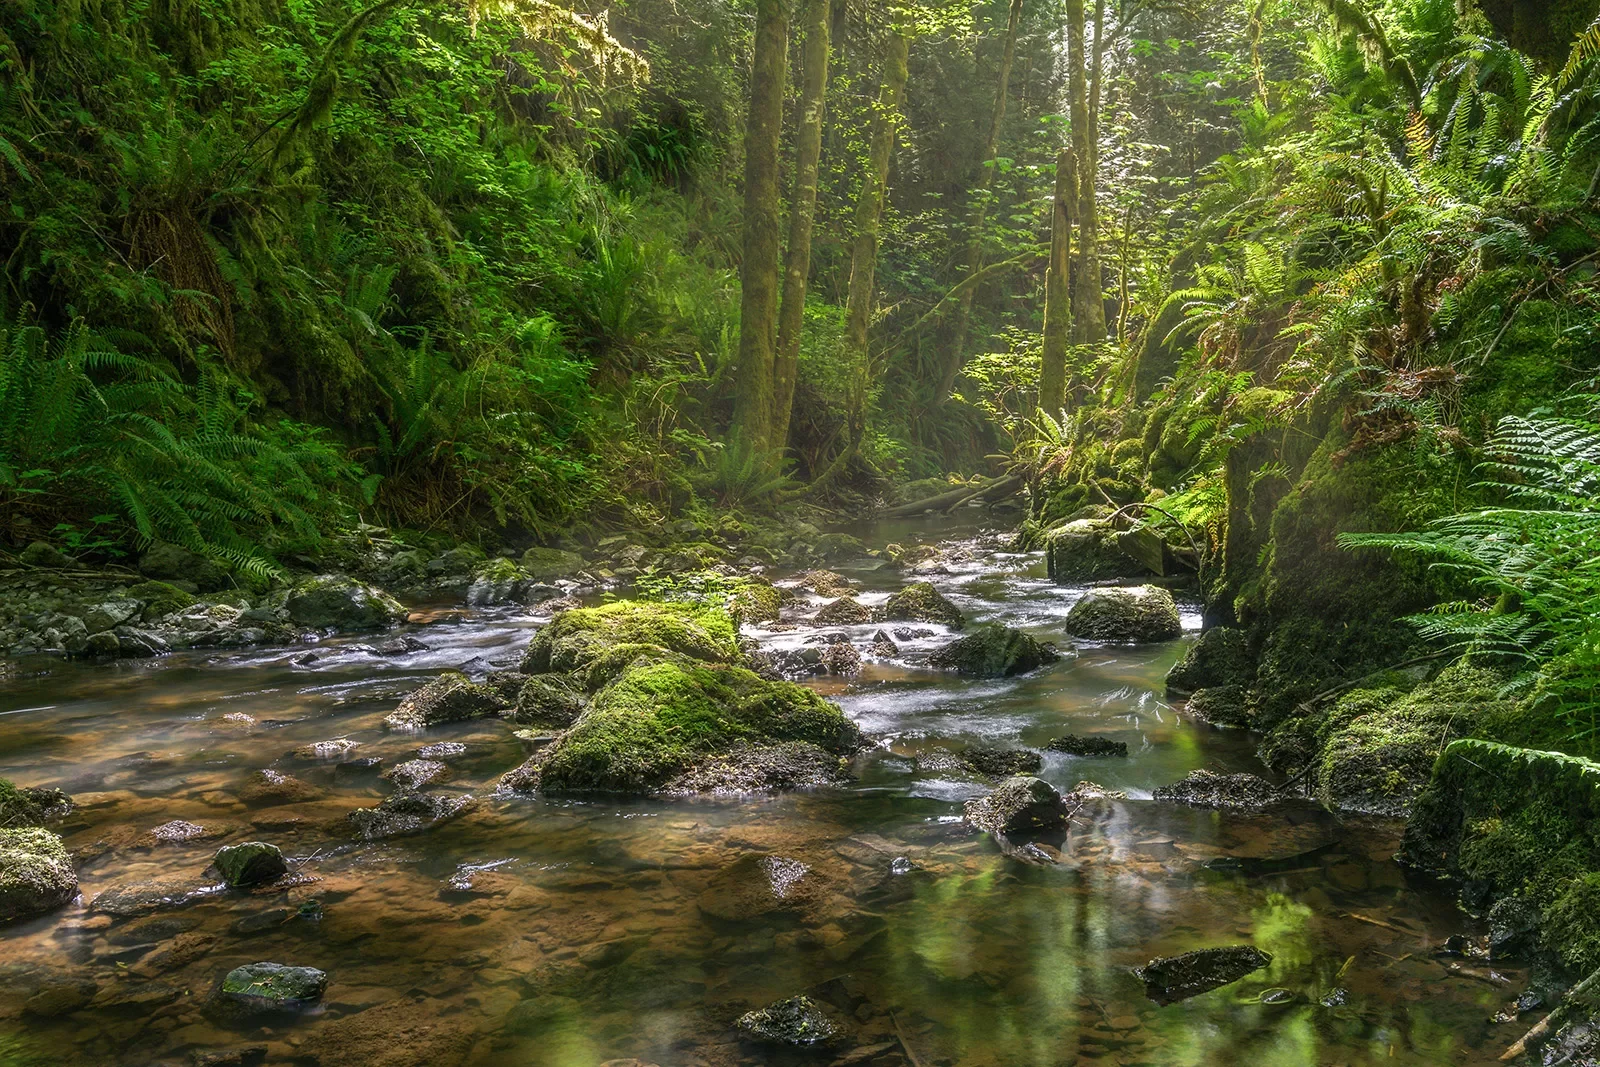 Tod Creek in Gowland Tod Provincial Park, Victoria, British Columbia Canada